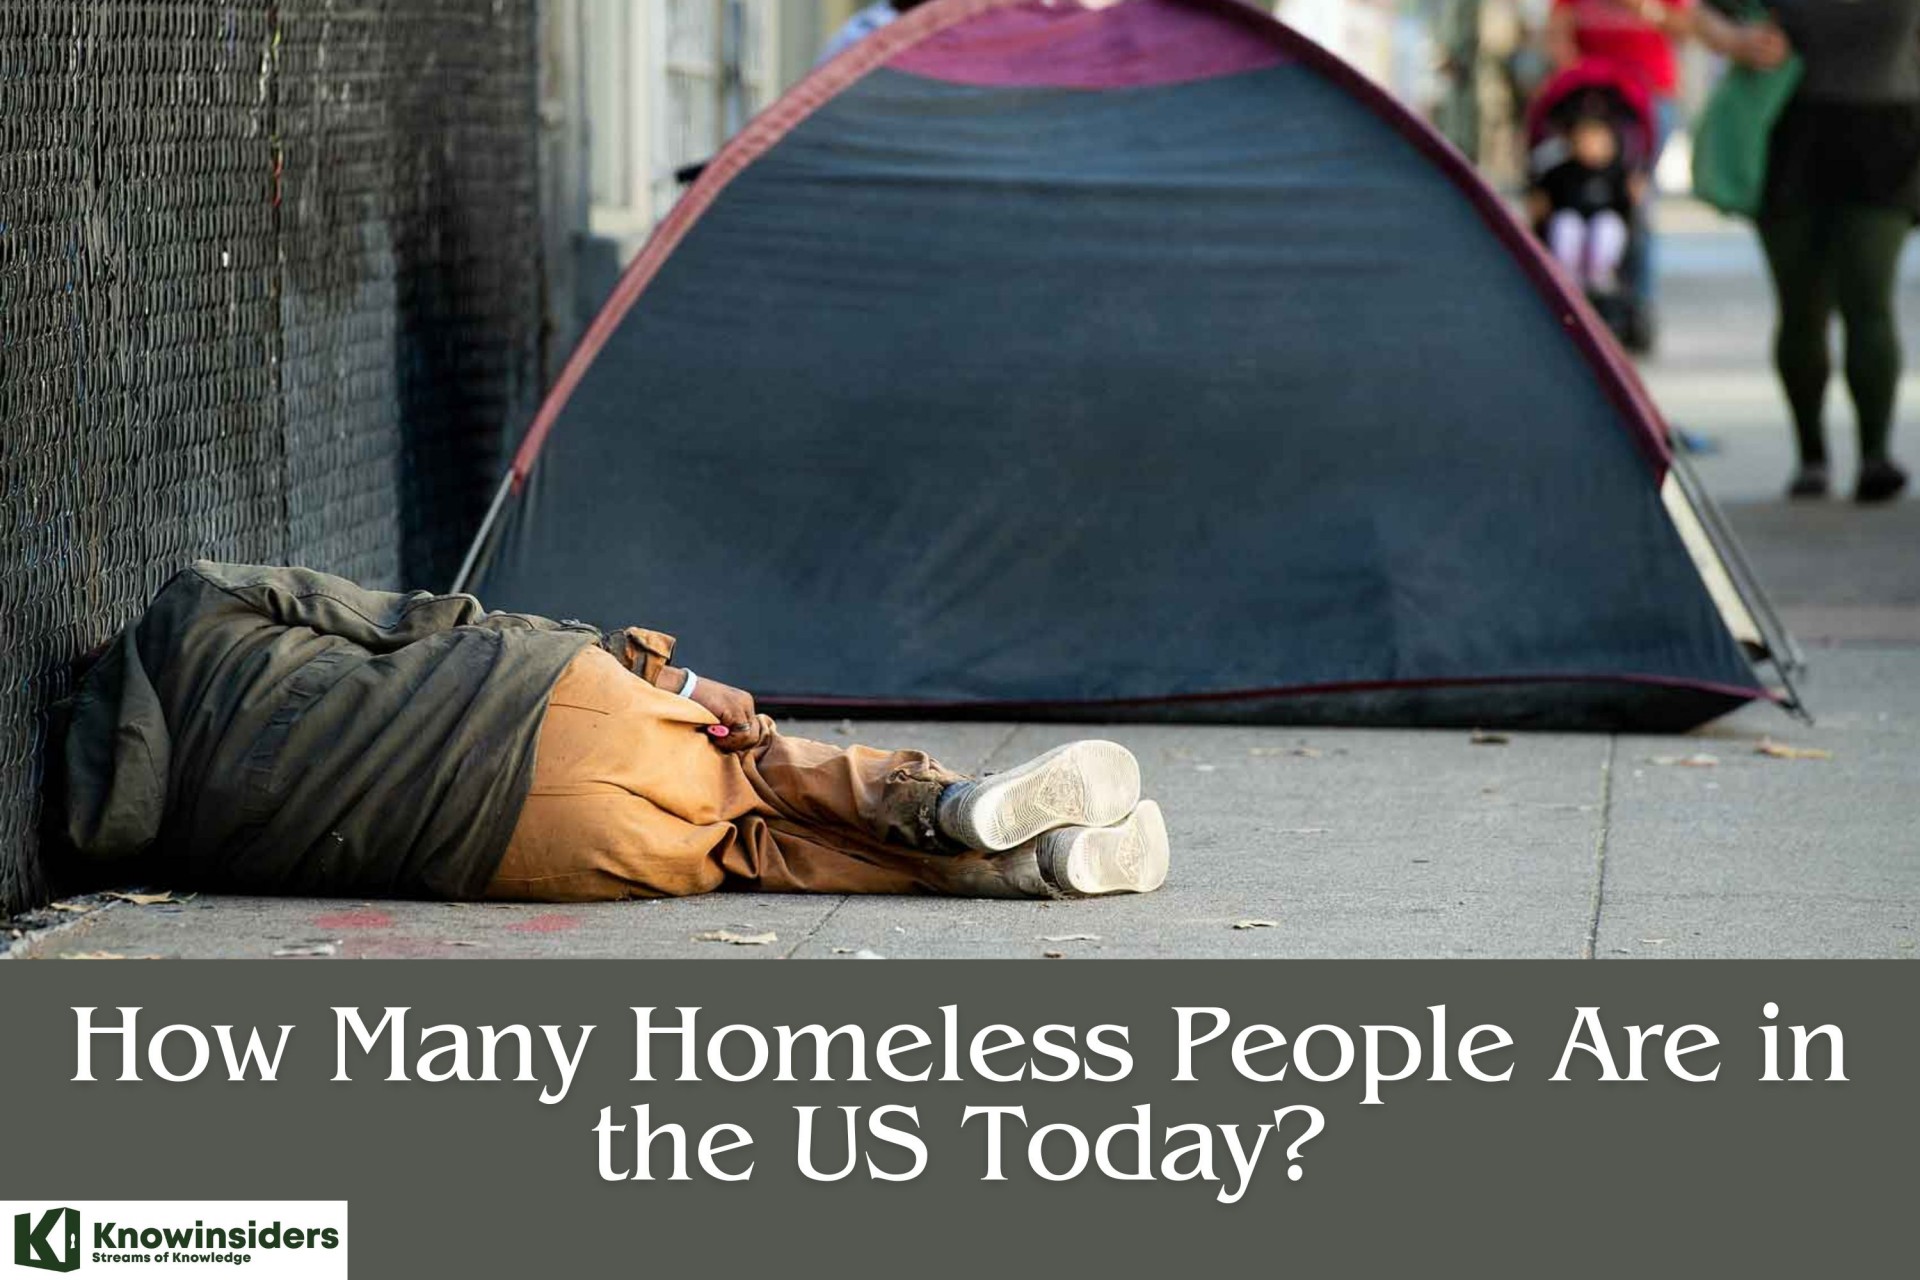 How Many Homeless People Are There in the US Today?